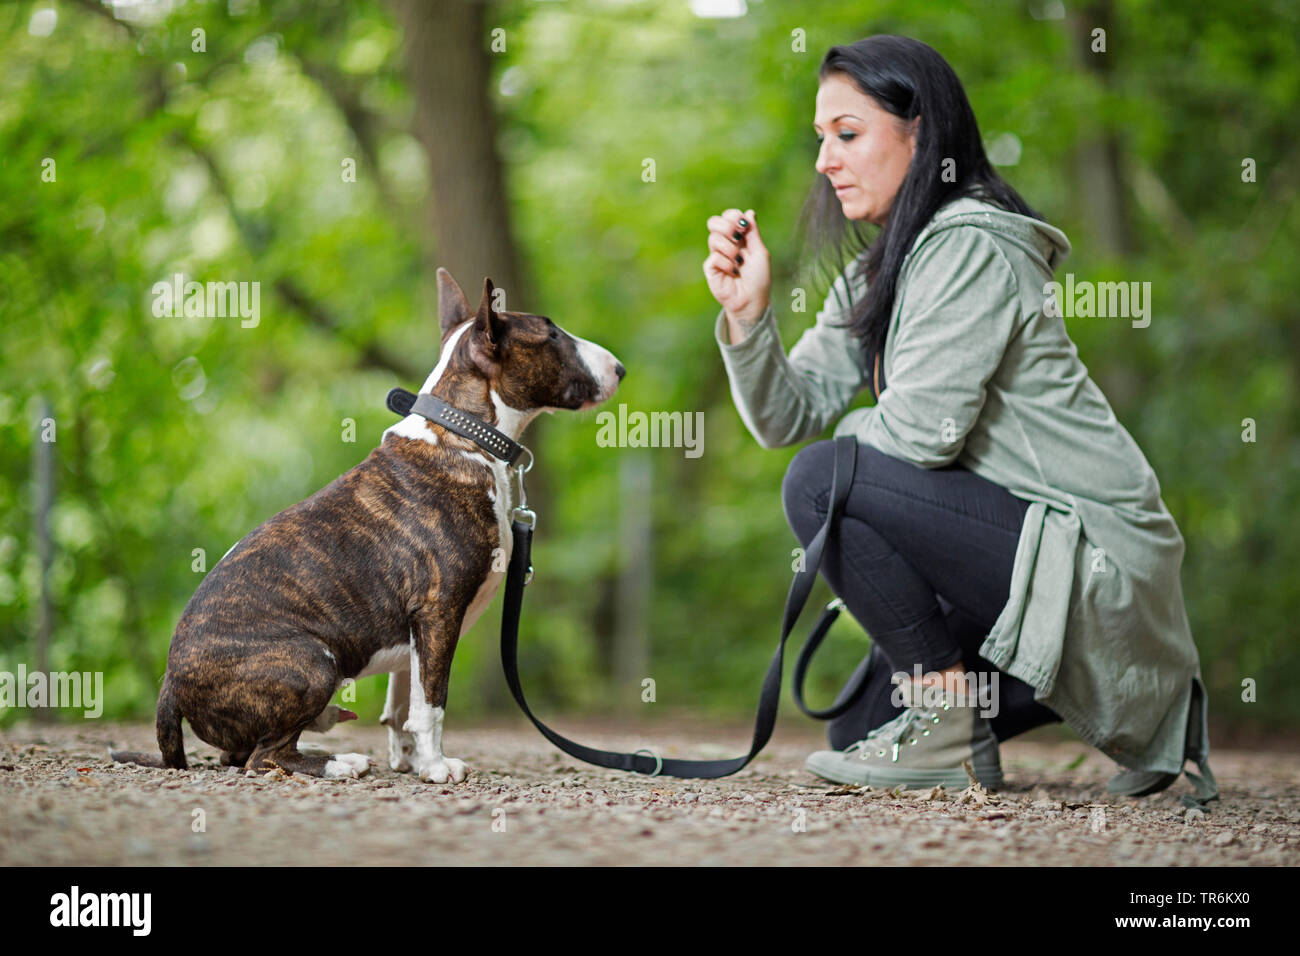 Bull Terrier (Canis lupus f. familiaris), woman exercising with her dog 'sit', Germany Stock Photo